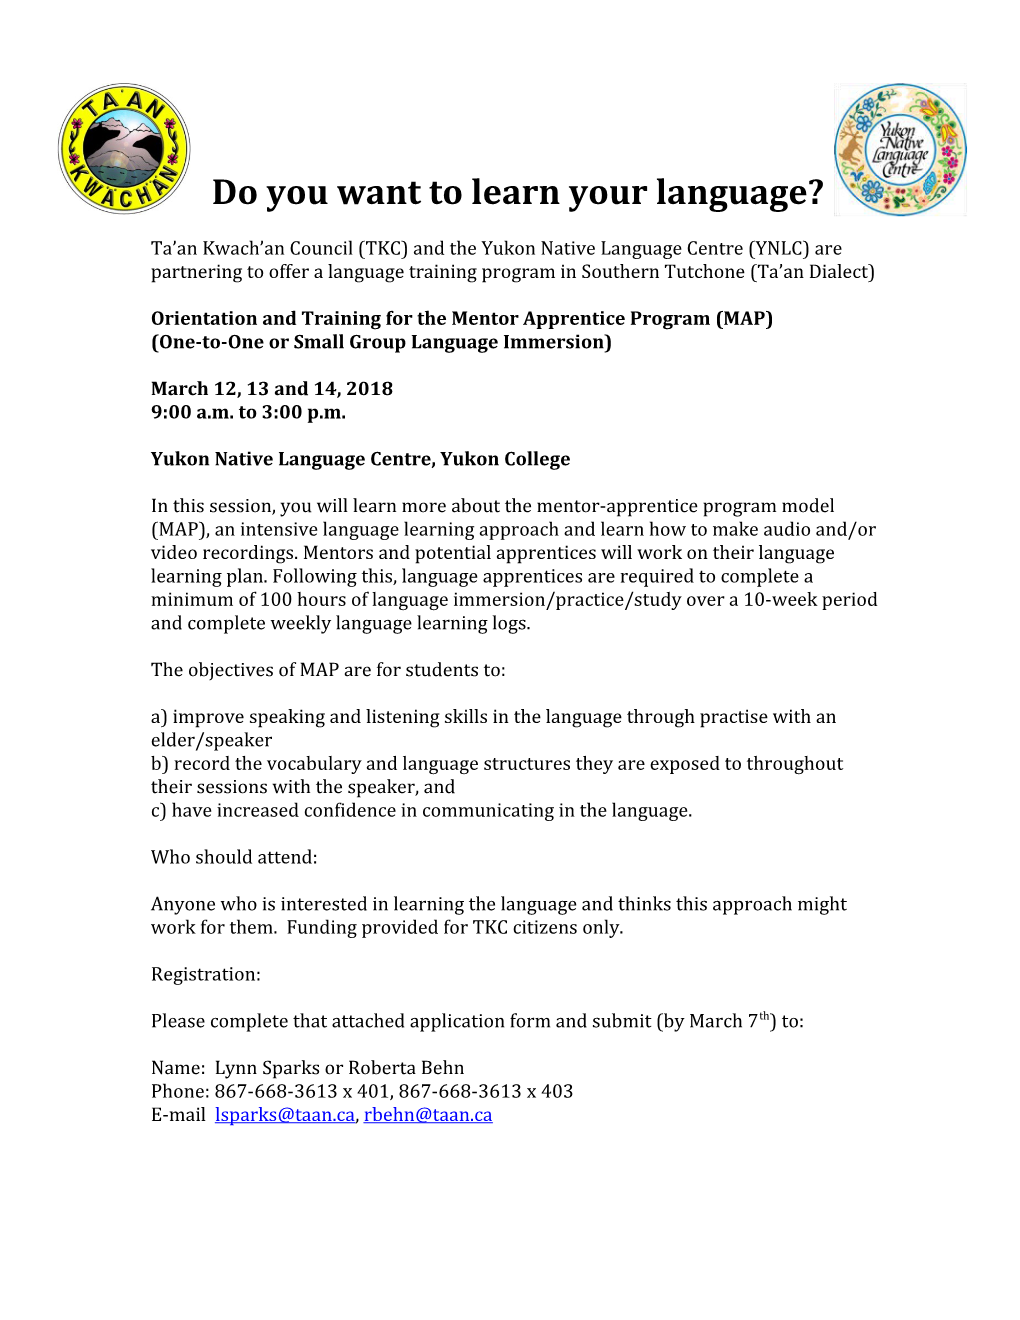 Do You Want to Learn Your Language?